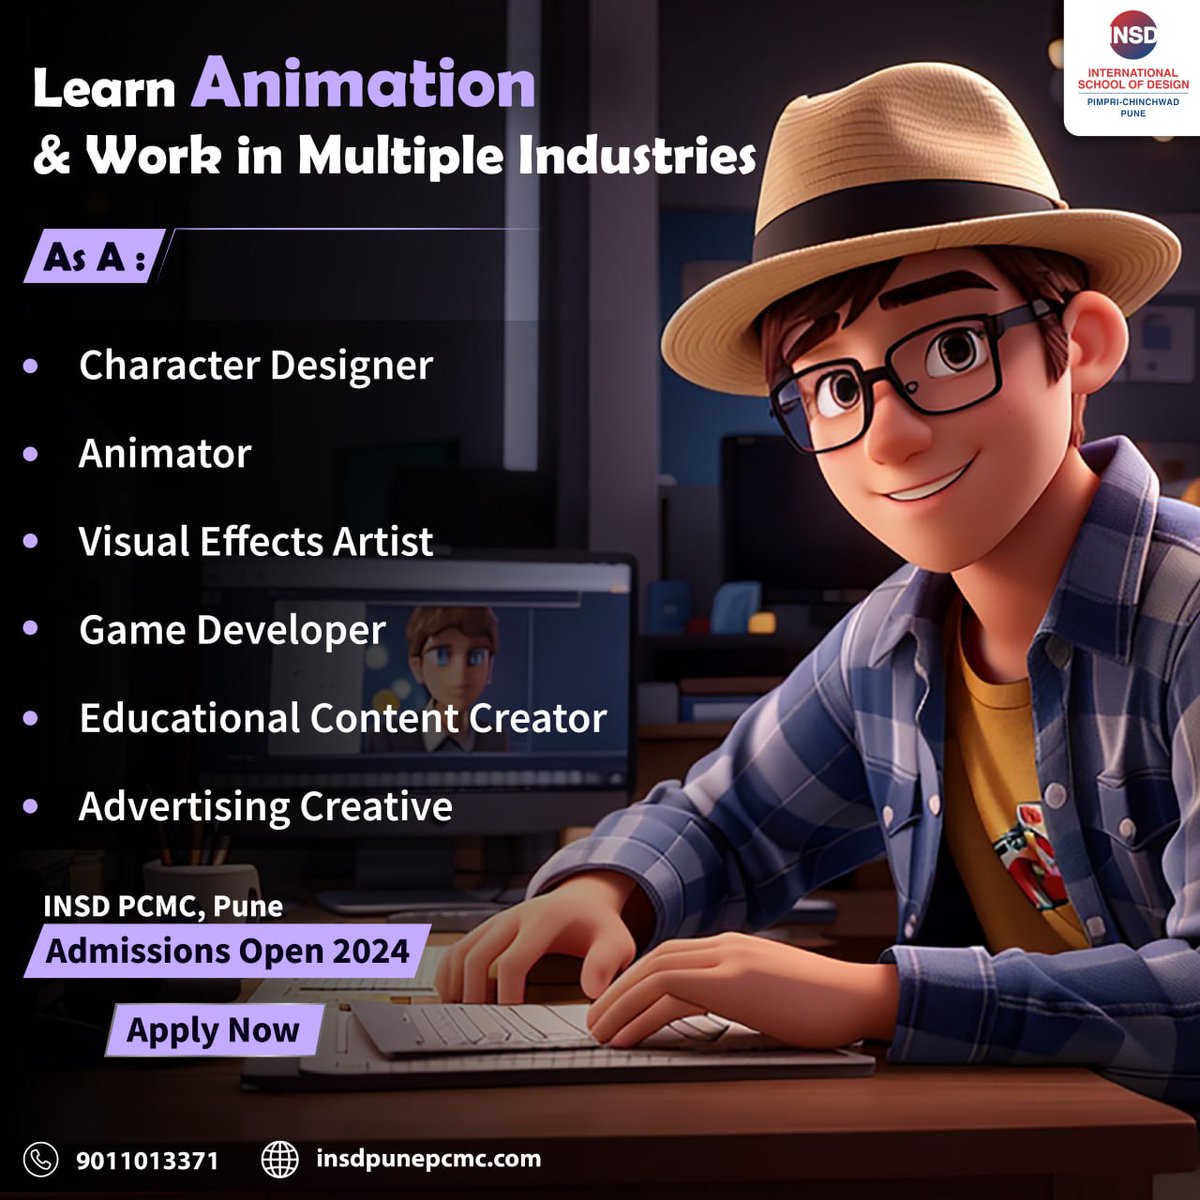 From animating characters to crafting stunning visual effects, explore diverse career paths in animation. 
Admissions For 2024 Open.
Apply Now!
#AnimationCareers #ApplyNow #ArtisticJourney #CareerExploration #DigitalArtistry  #FutureofAnimation #MultimediaArts #JoinOurTeam